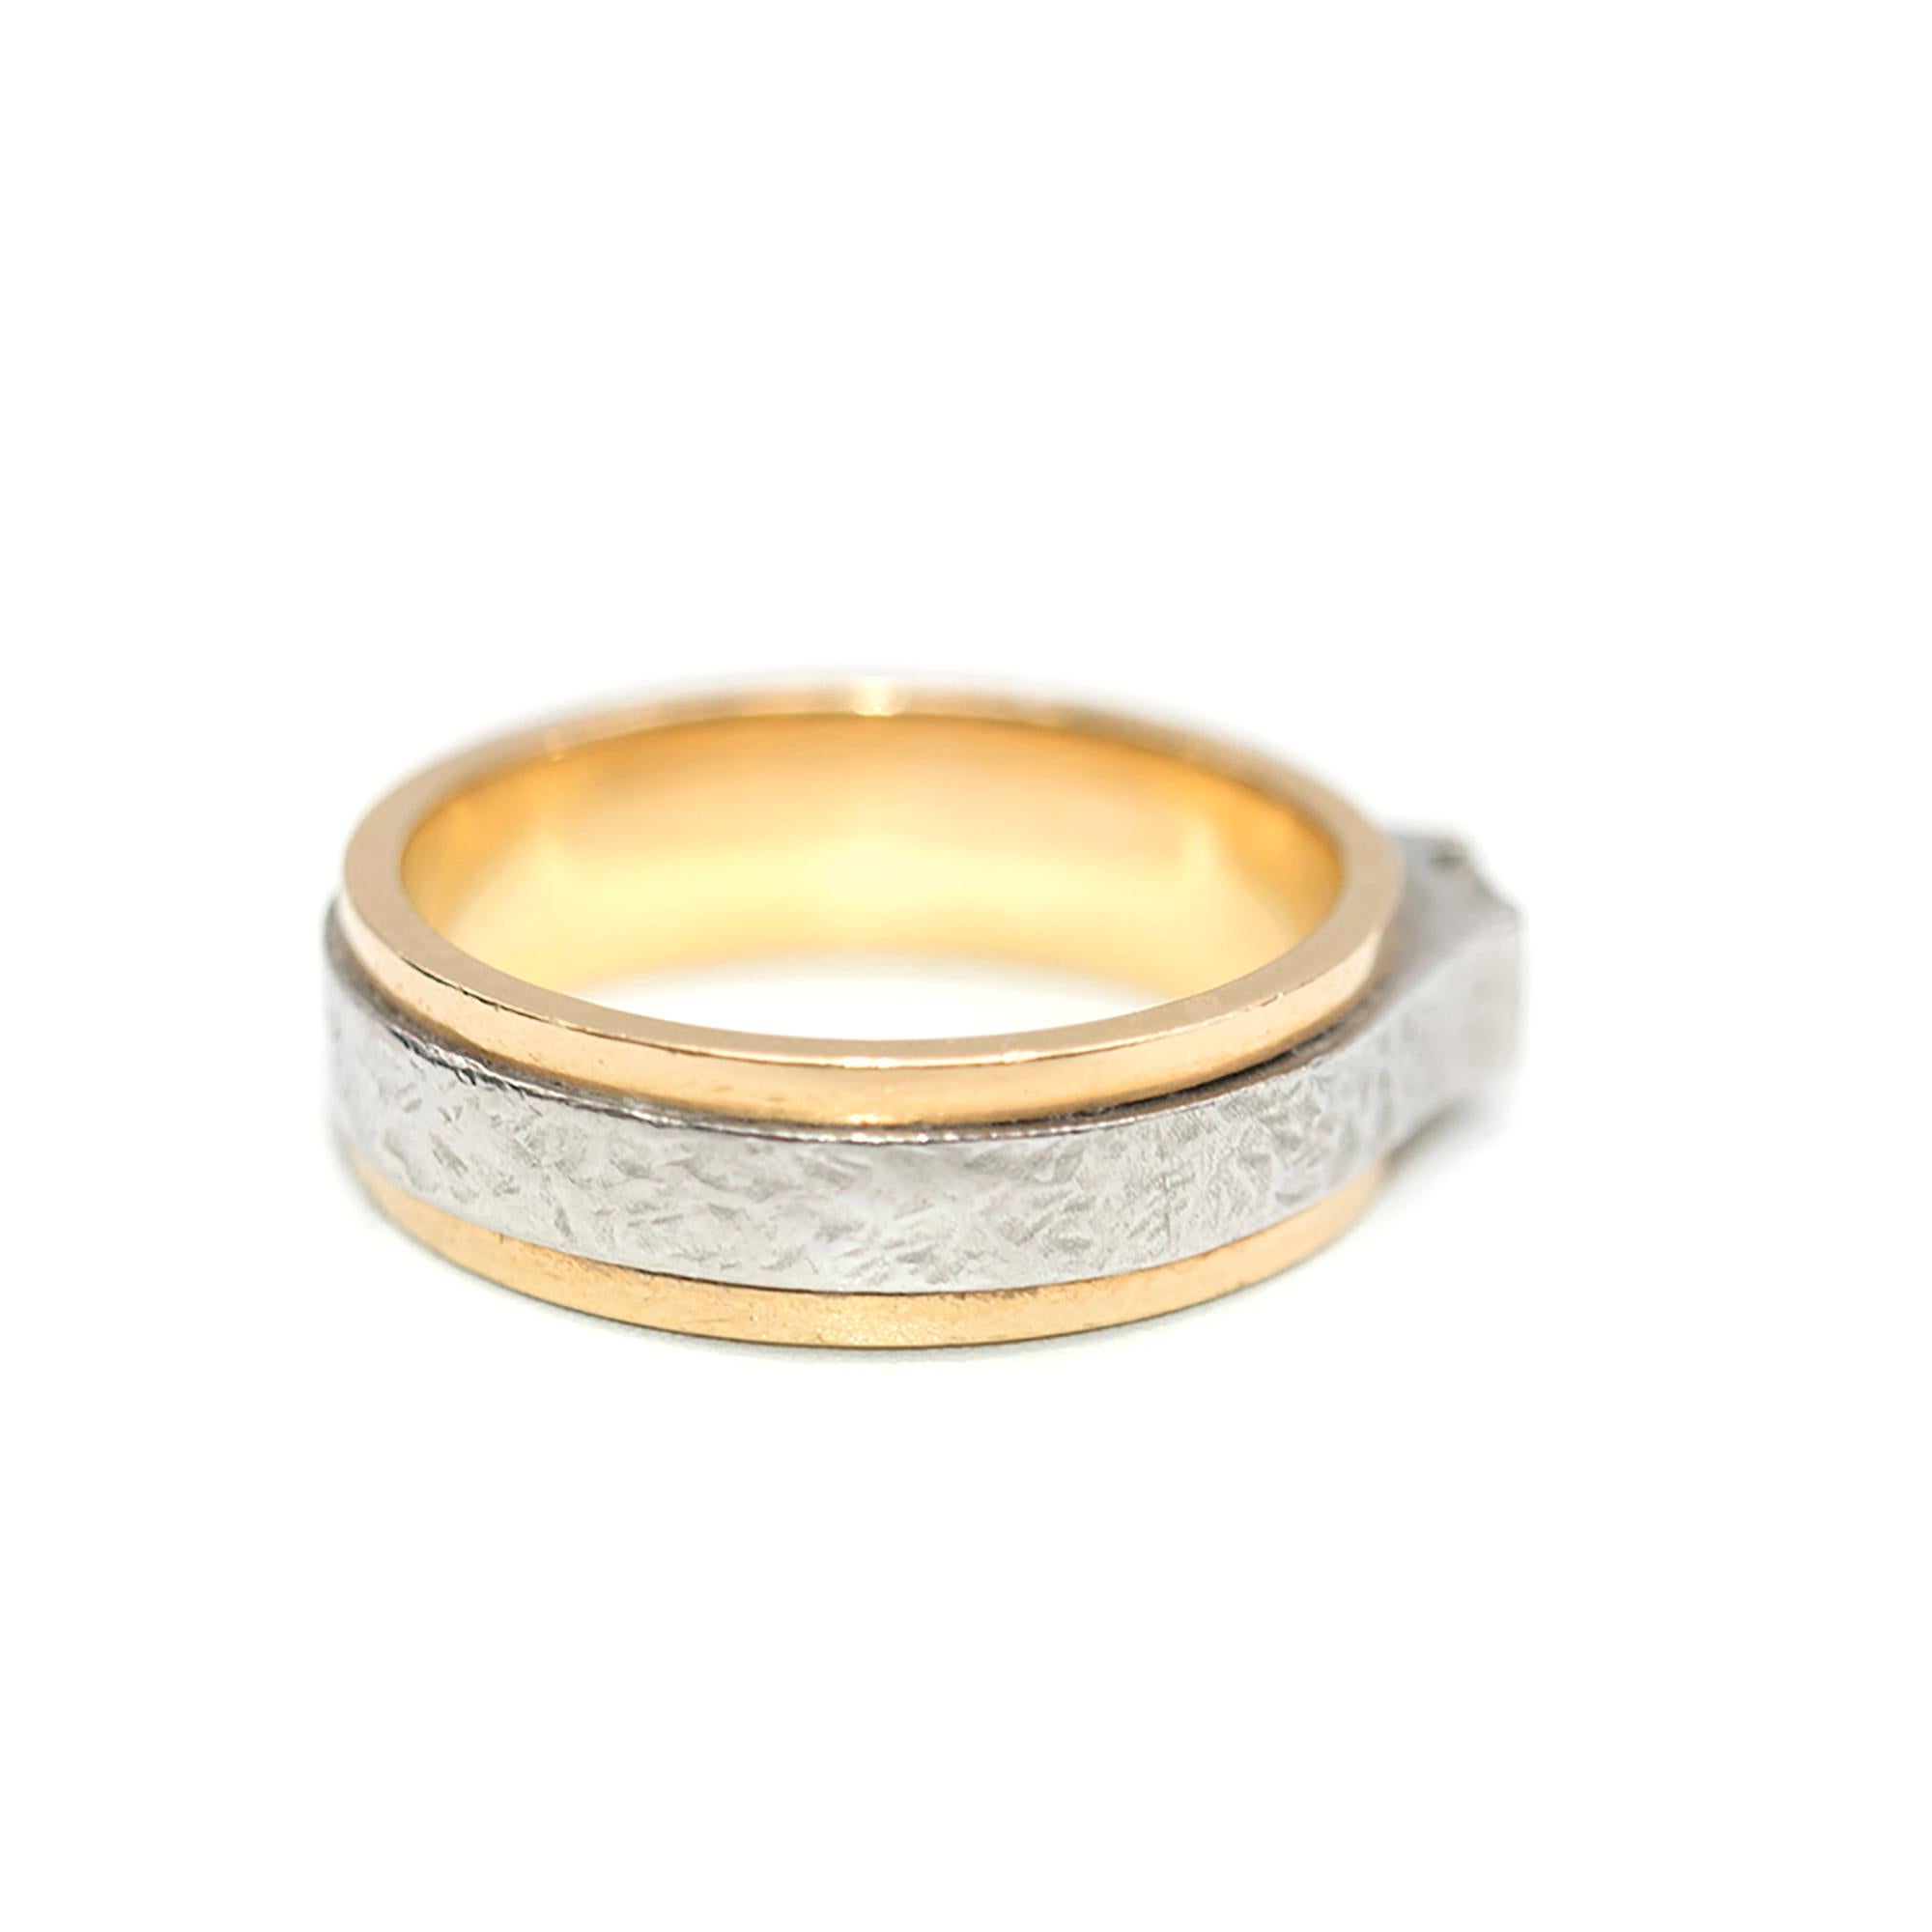 Bespoke Yellow Gold & Platinum Single Diamond Ring

18k yellow gold with hammered platinum overlay
One single bright white square diamond in center

Size US8/Q
Diamond Width: 2mm
Ring weighs 10.84g

Please note, these items are pre-owned and may